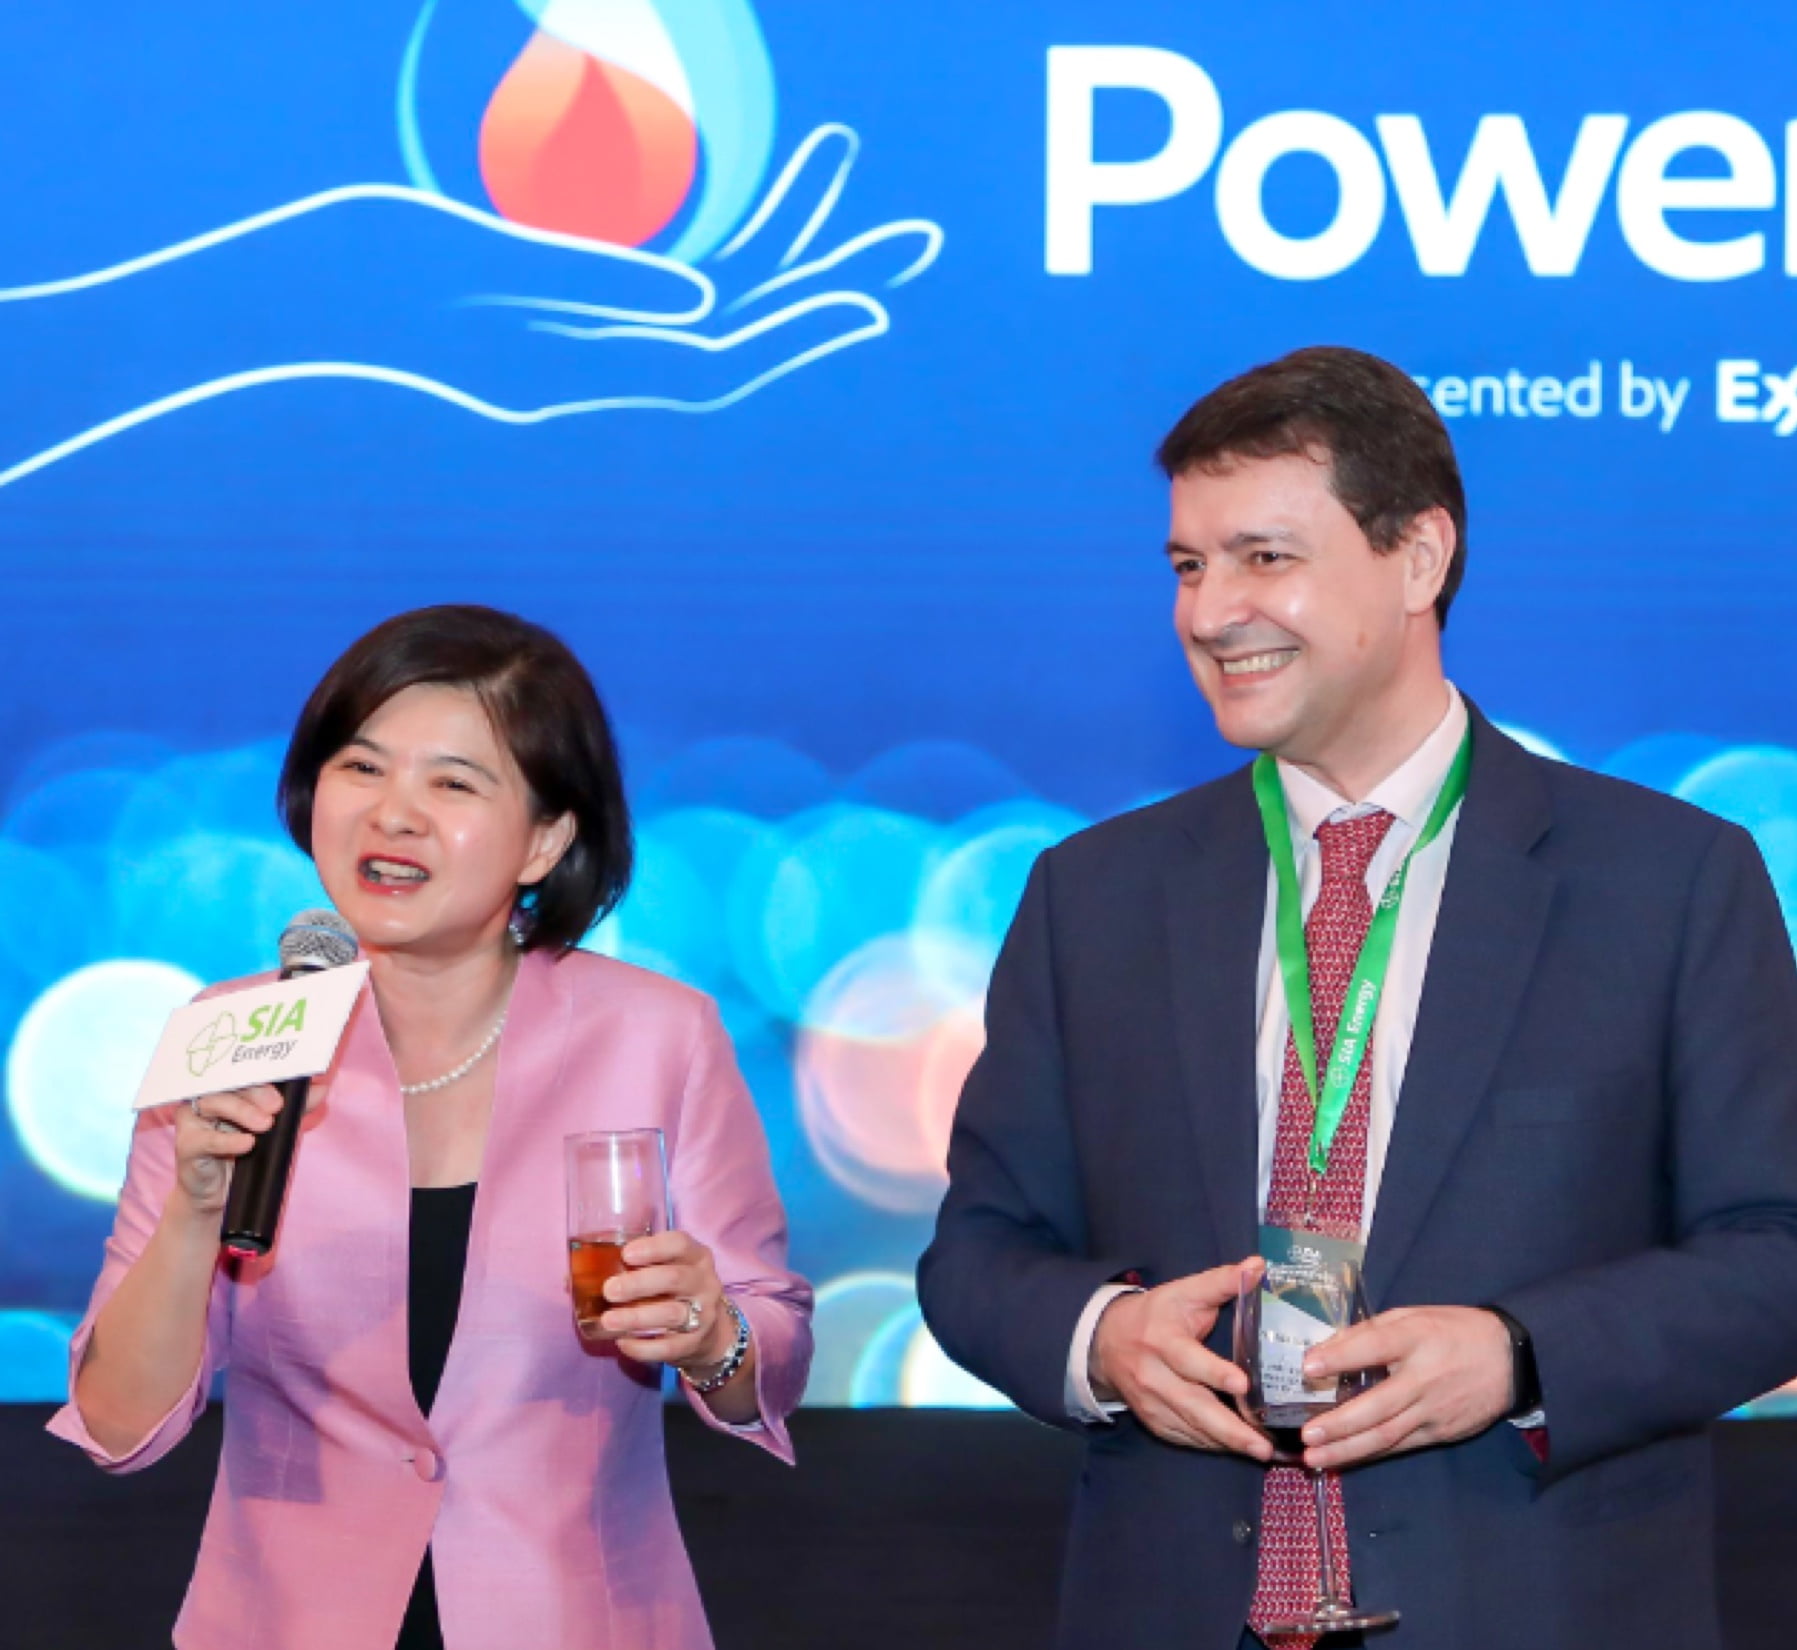 Tze San speaking at a Power Play event